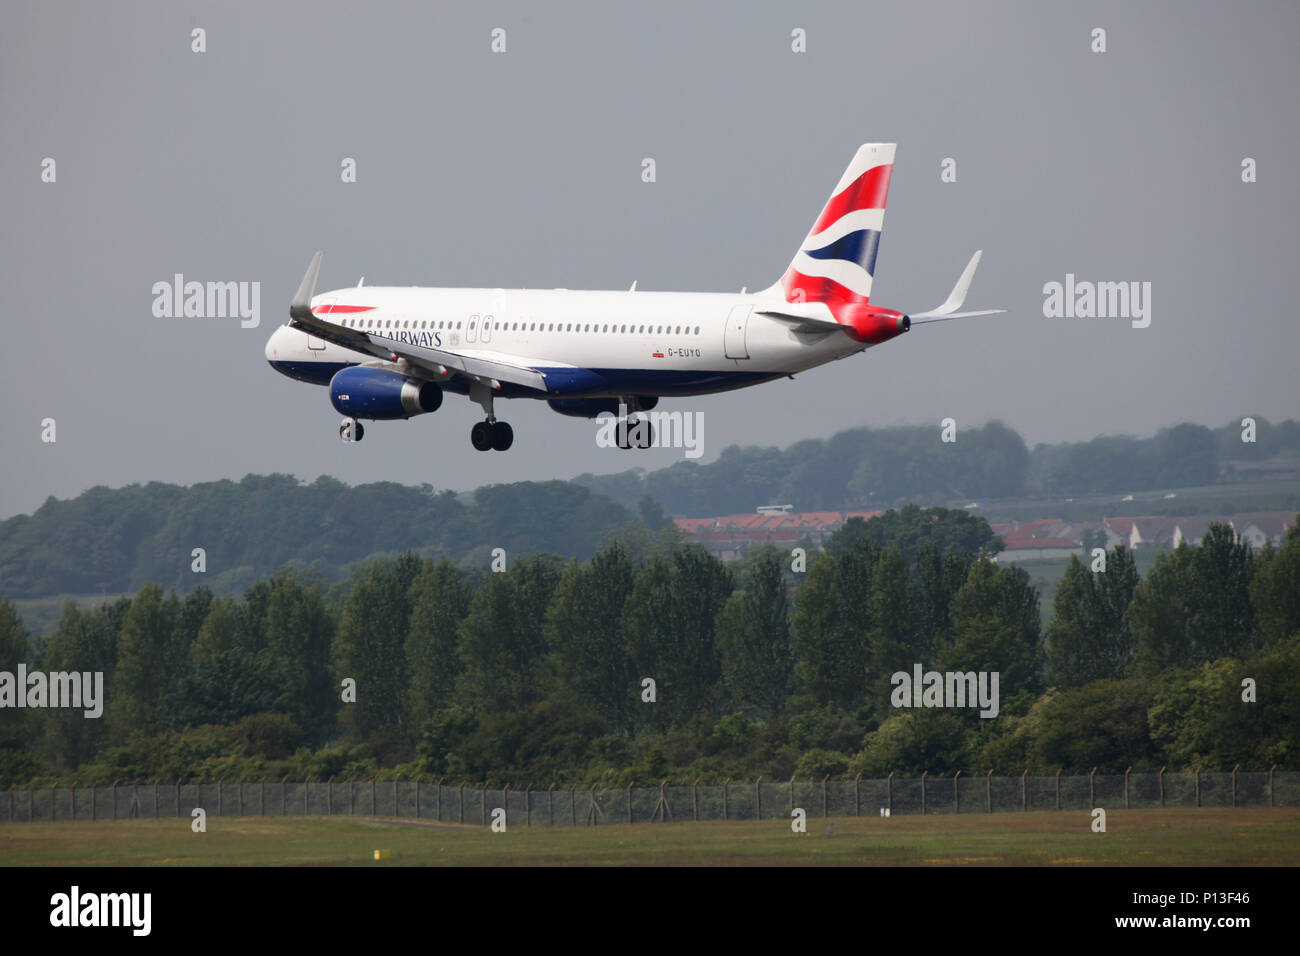 British Airways Airbus A320-232 jet G-EUYO on its final approach as it comes in to land at Edinburgh Airport Stock Photo